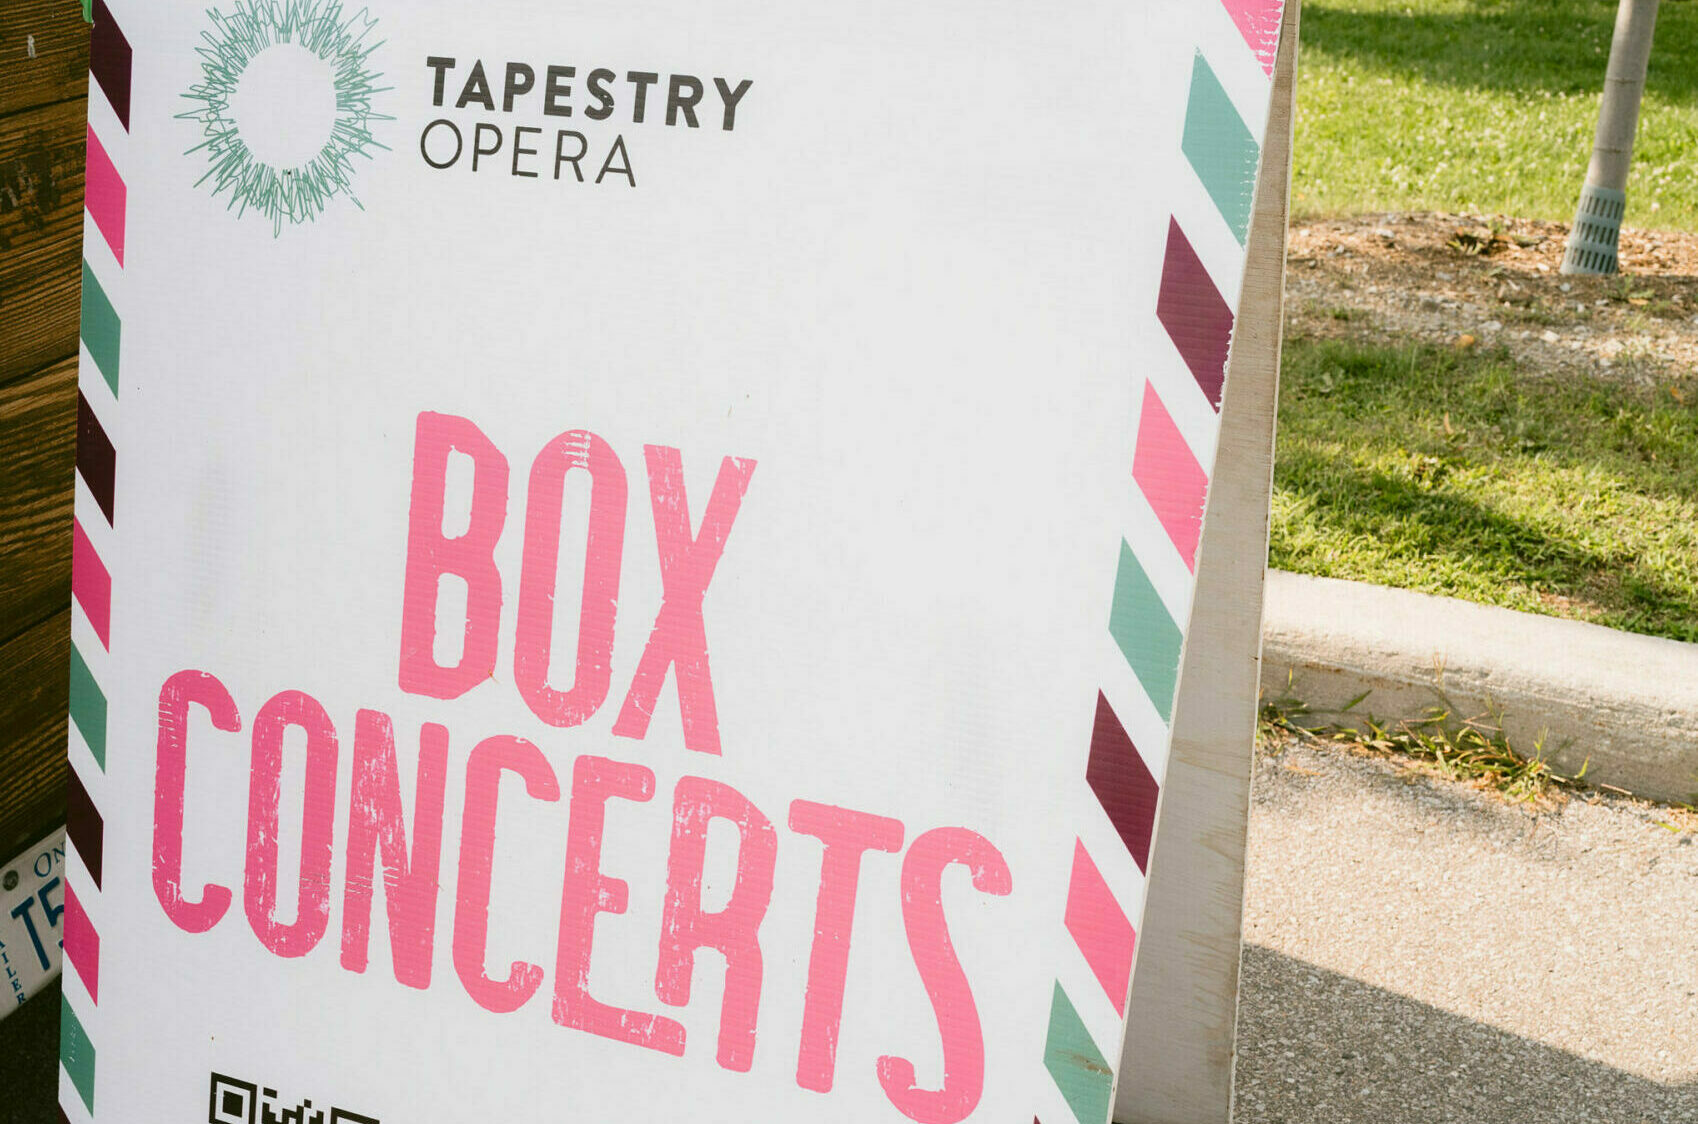 A sign that says, “Tapestry Opera Box Concerts.”